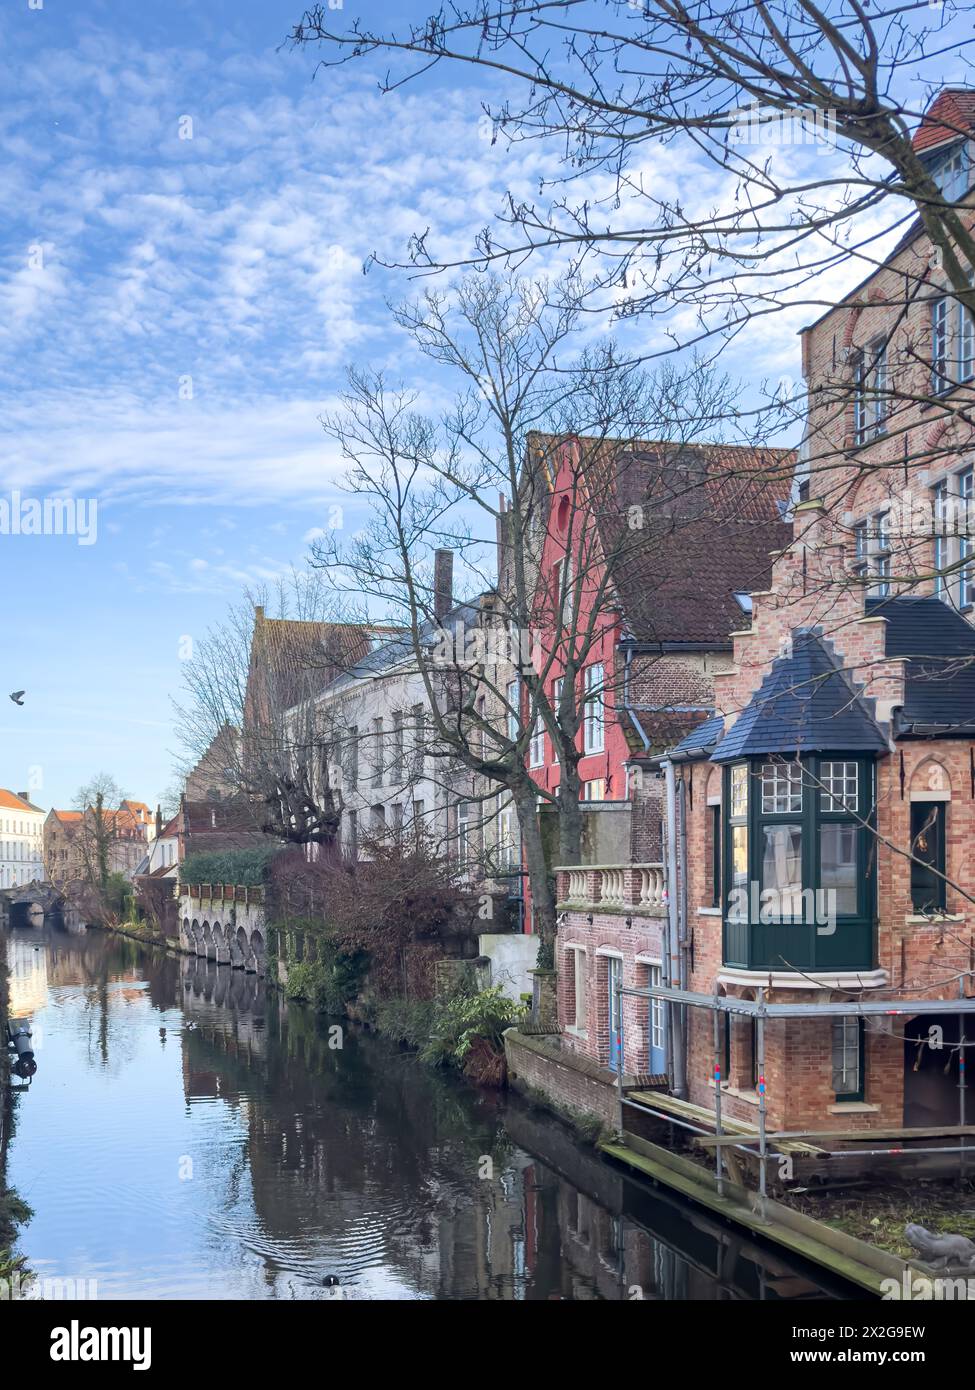 Belgium historic building view famous place to tourism, Bruges, Belgium historic canals at daytime. Stock Photo